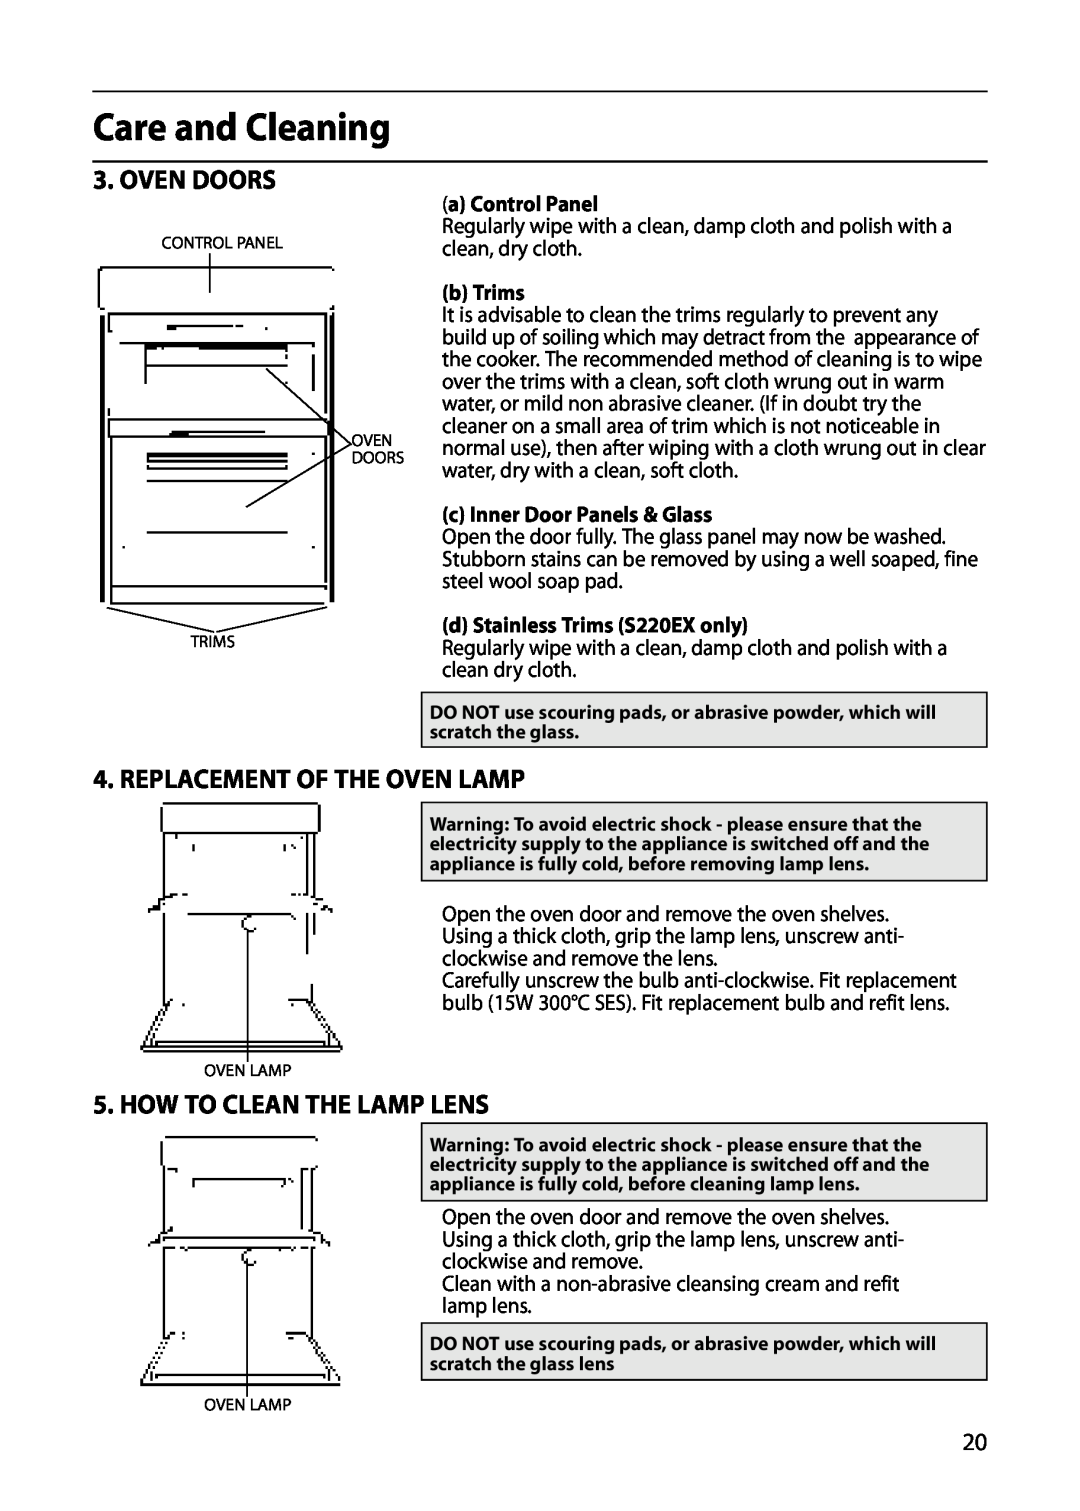 Hotpoint S220E Care and Cleaning, Oven Doors, Replacement Of The Oven Lamp, How To Clean The Lamp Lens, a Control Panel 